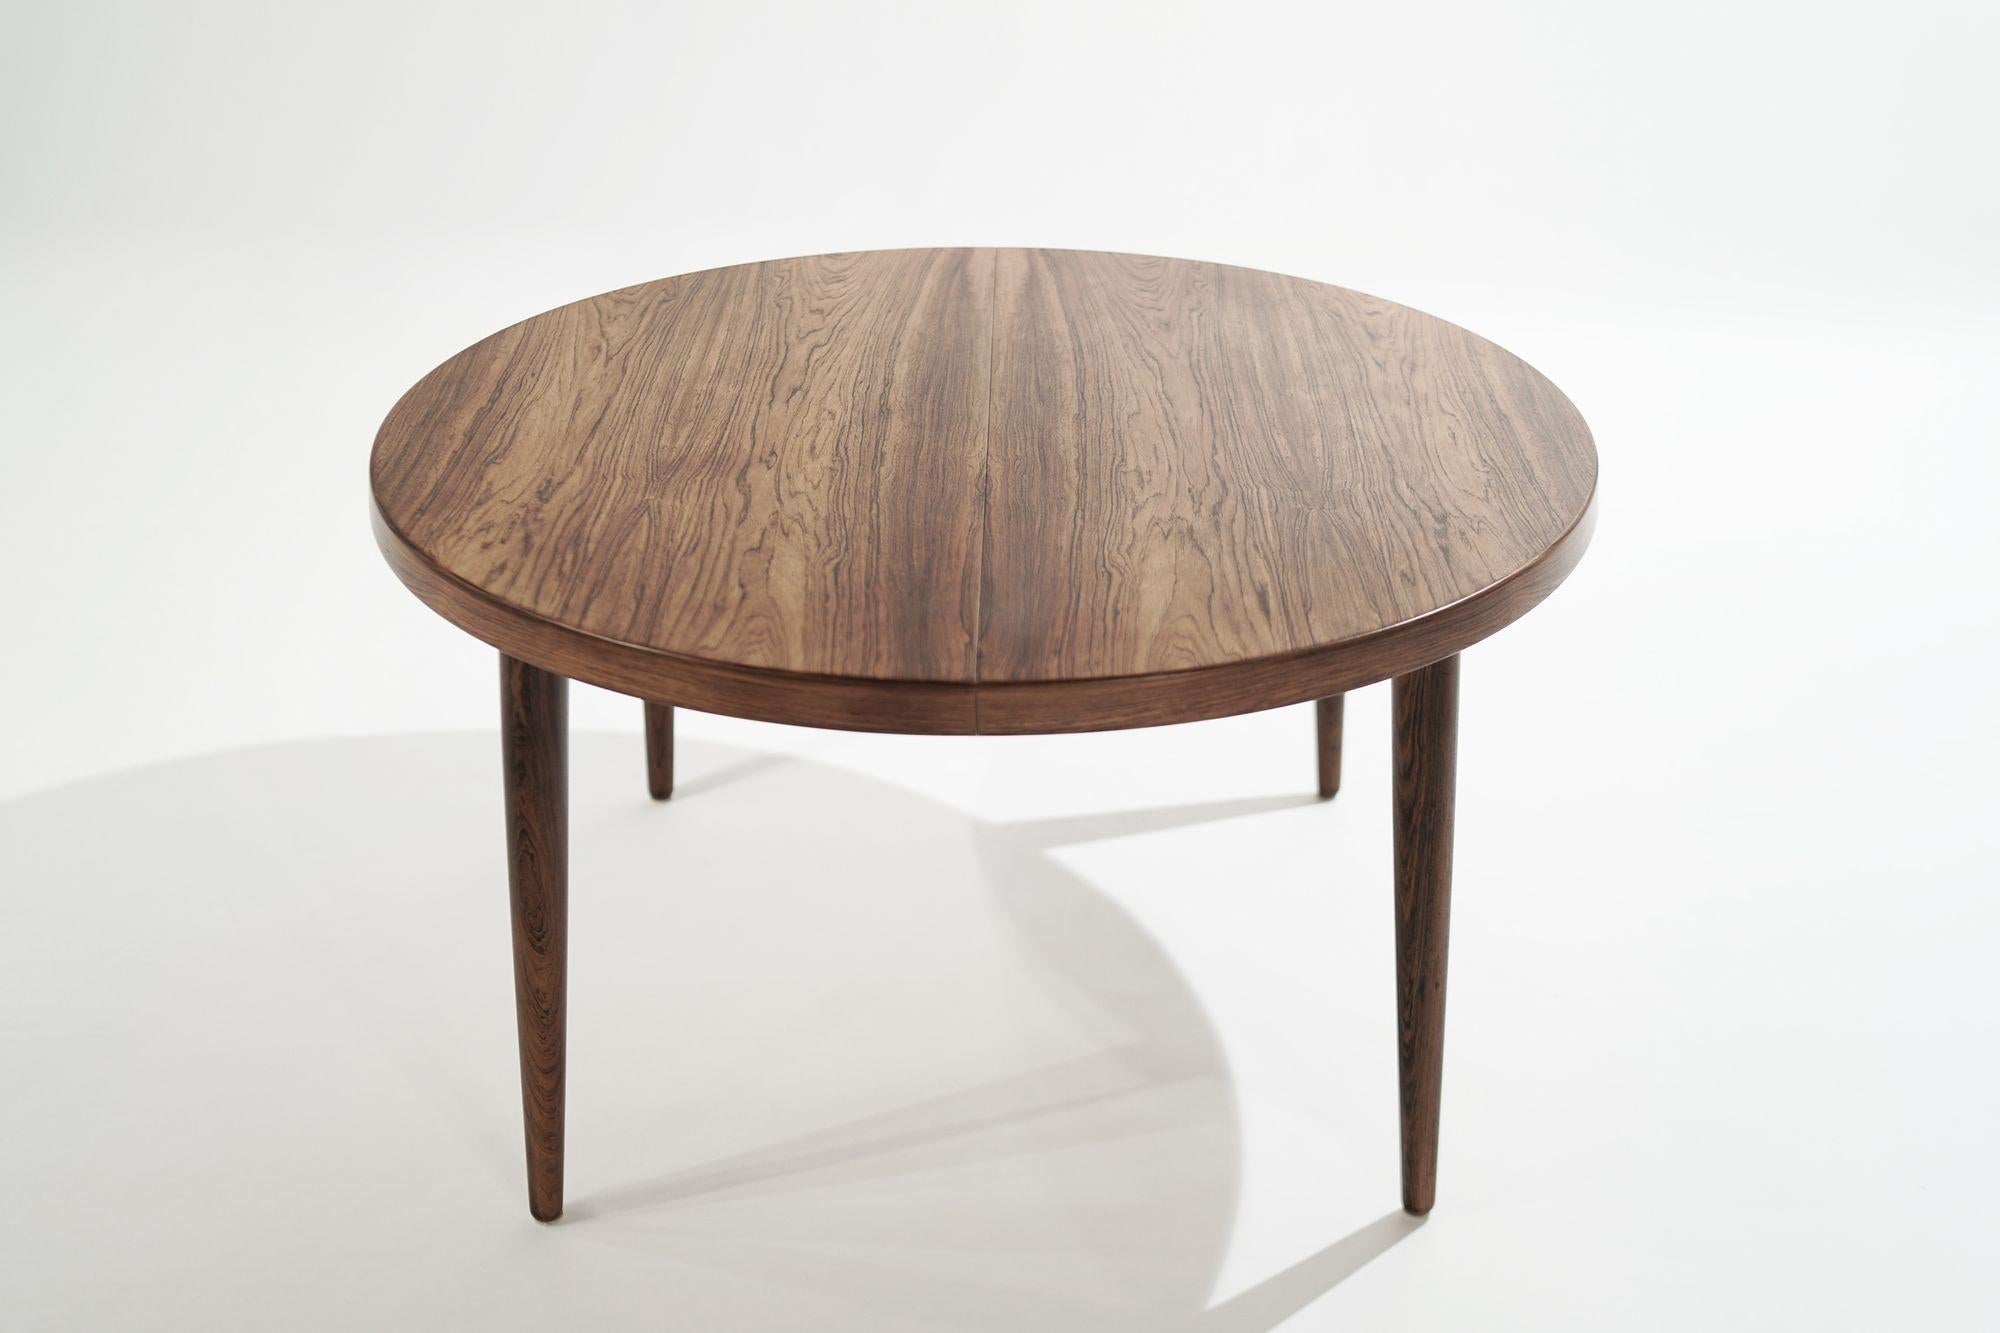 A beautiful Scandinavian-Modern breakfast or dining table original from Denmark, designed by Harry Østergaard, circa 1960-1969.
Perfect scale for a 